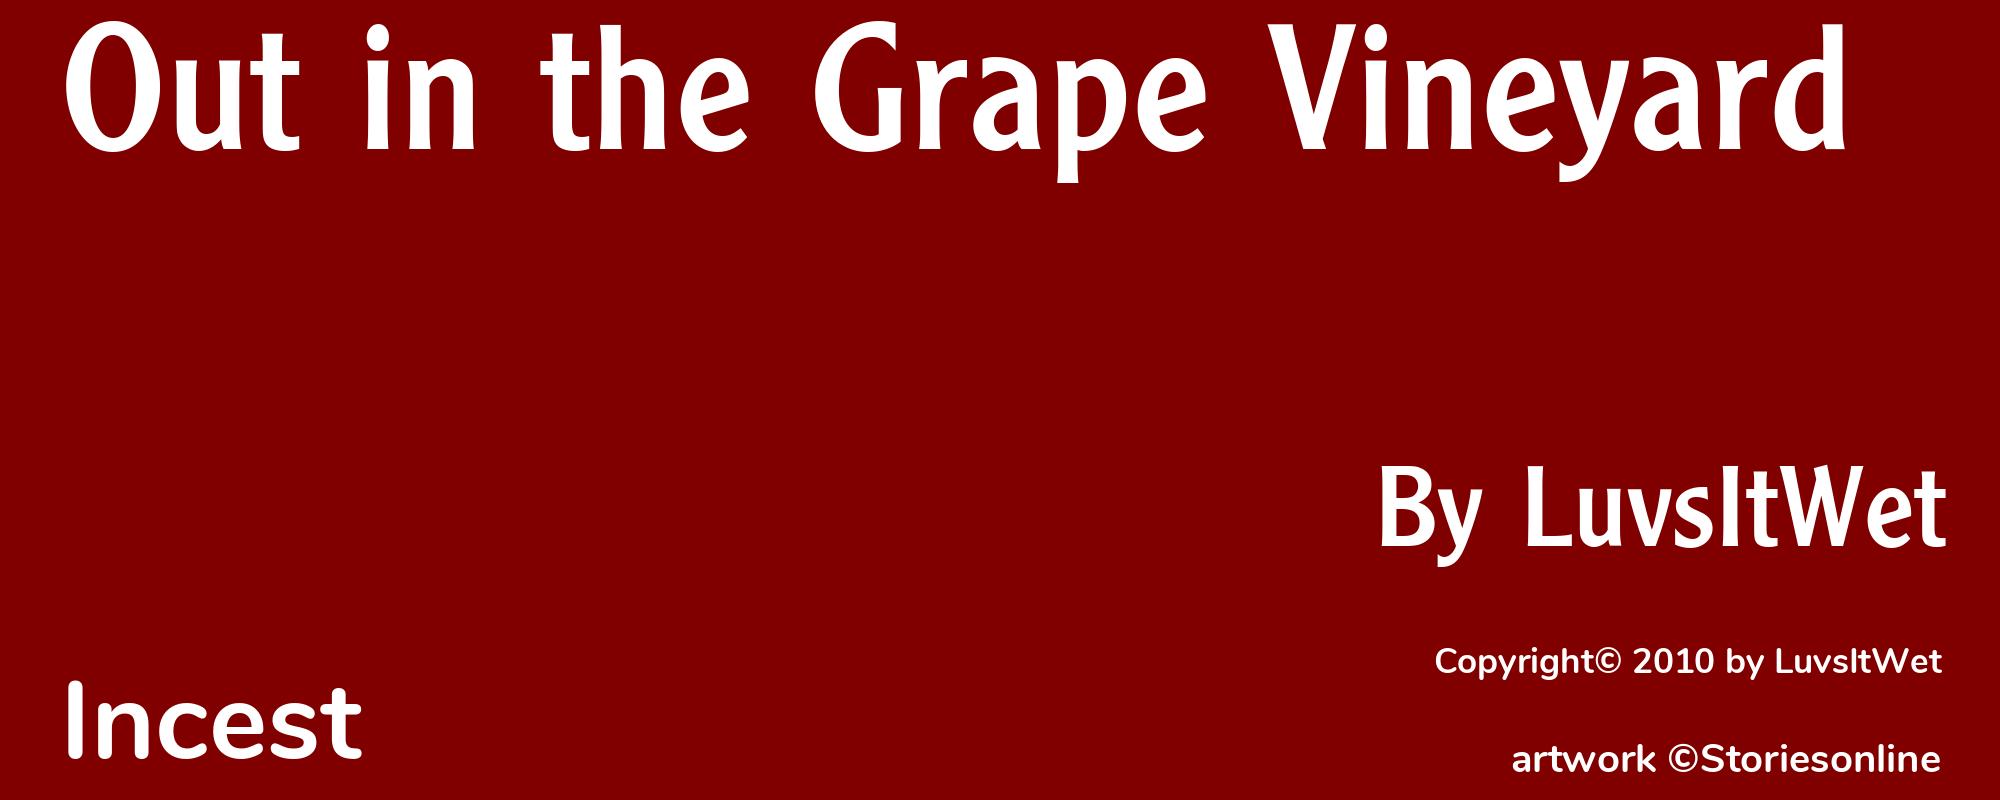 Out in the Grape Vineyard - Cover